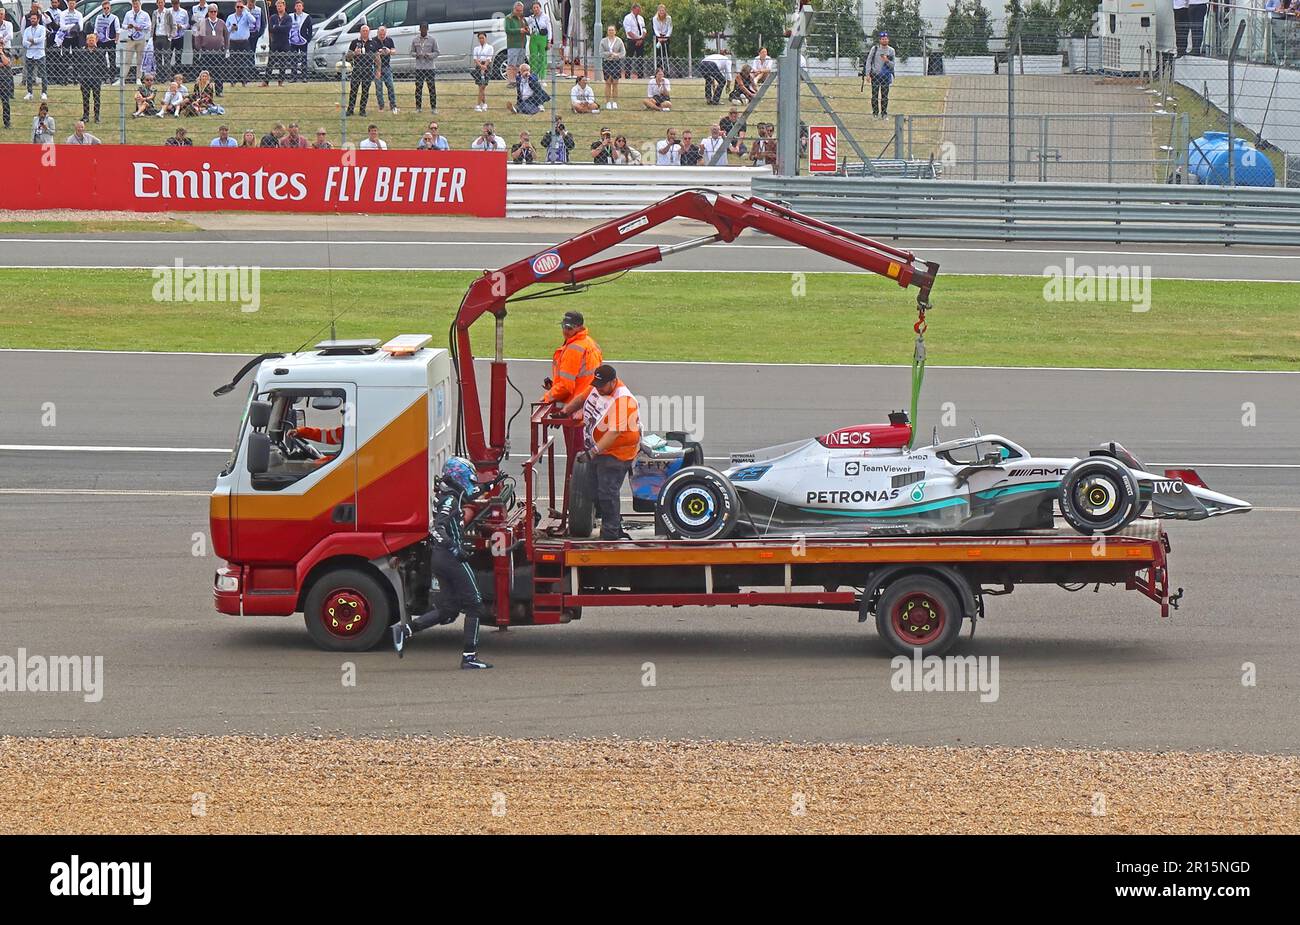 George Russell's Mercedes 63 crashed F1 GP car, being recovered July 2022 Silverstone, afrer Zhou Guanyu / Pierre Gasly  , collision Stock Photo